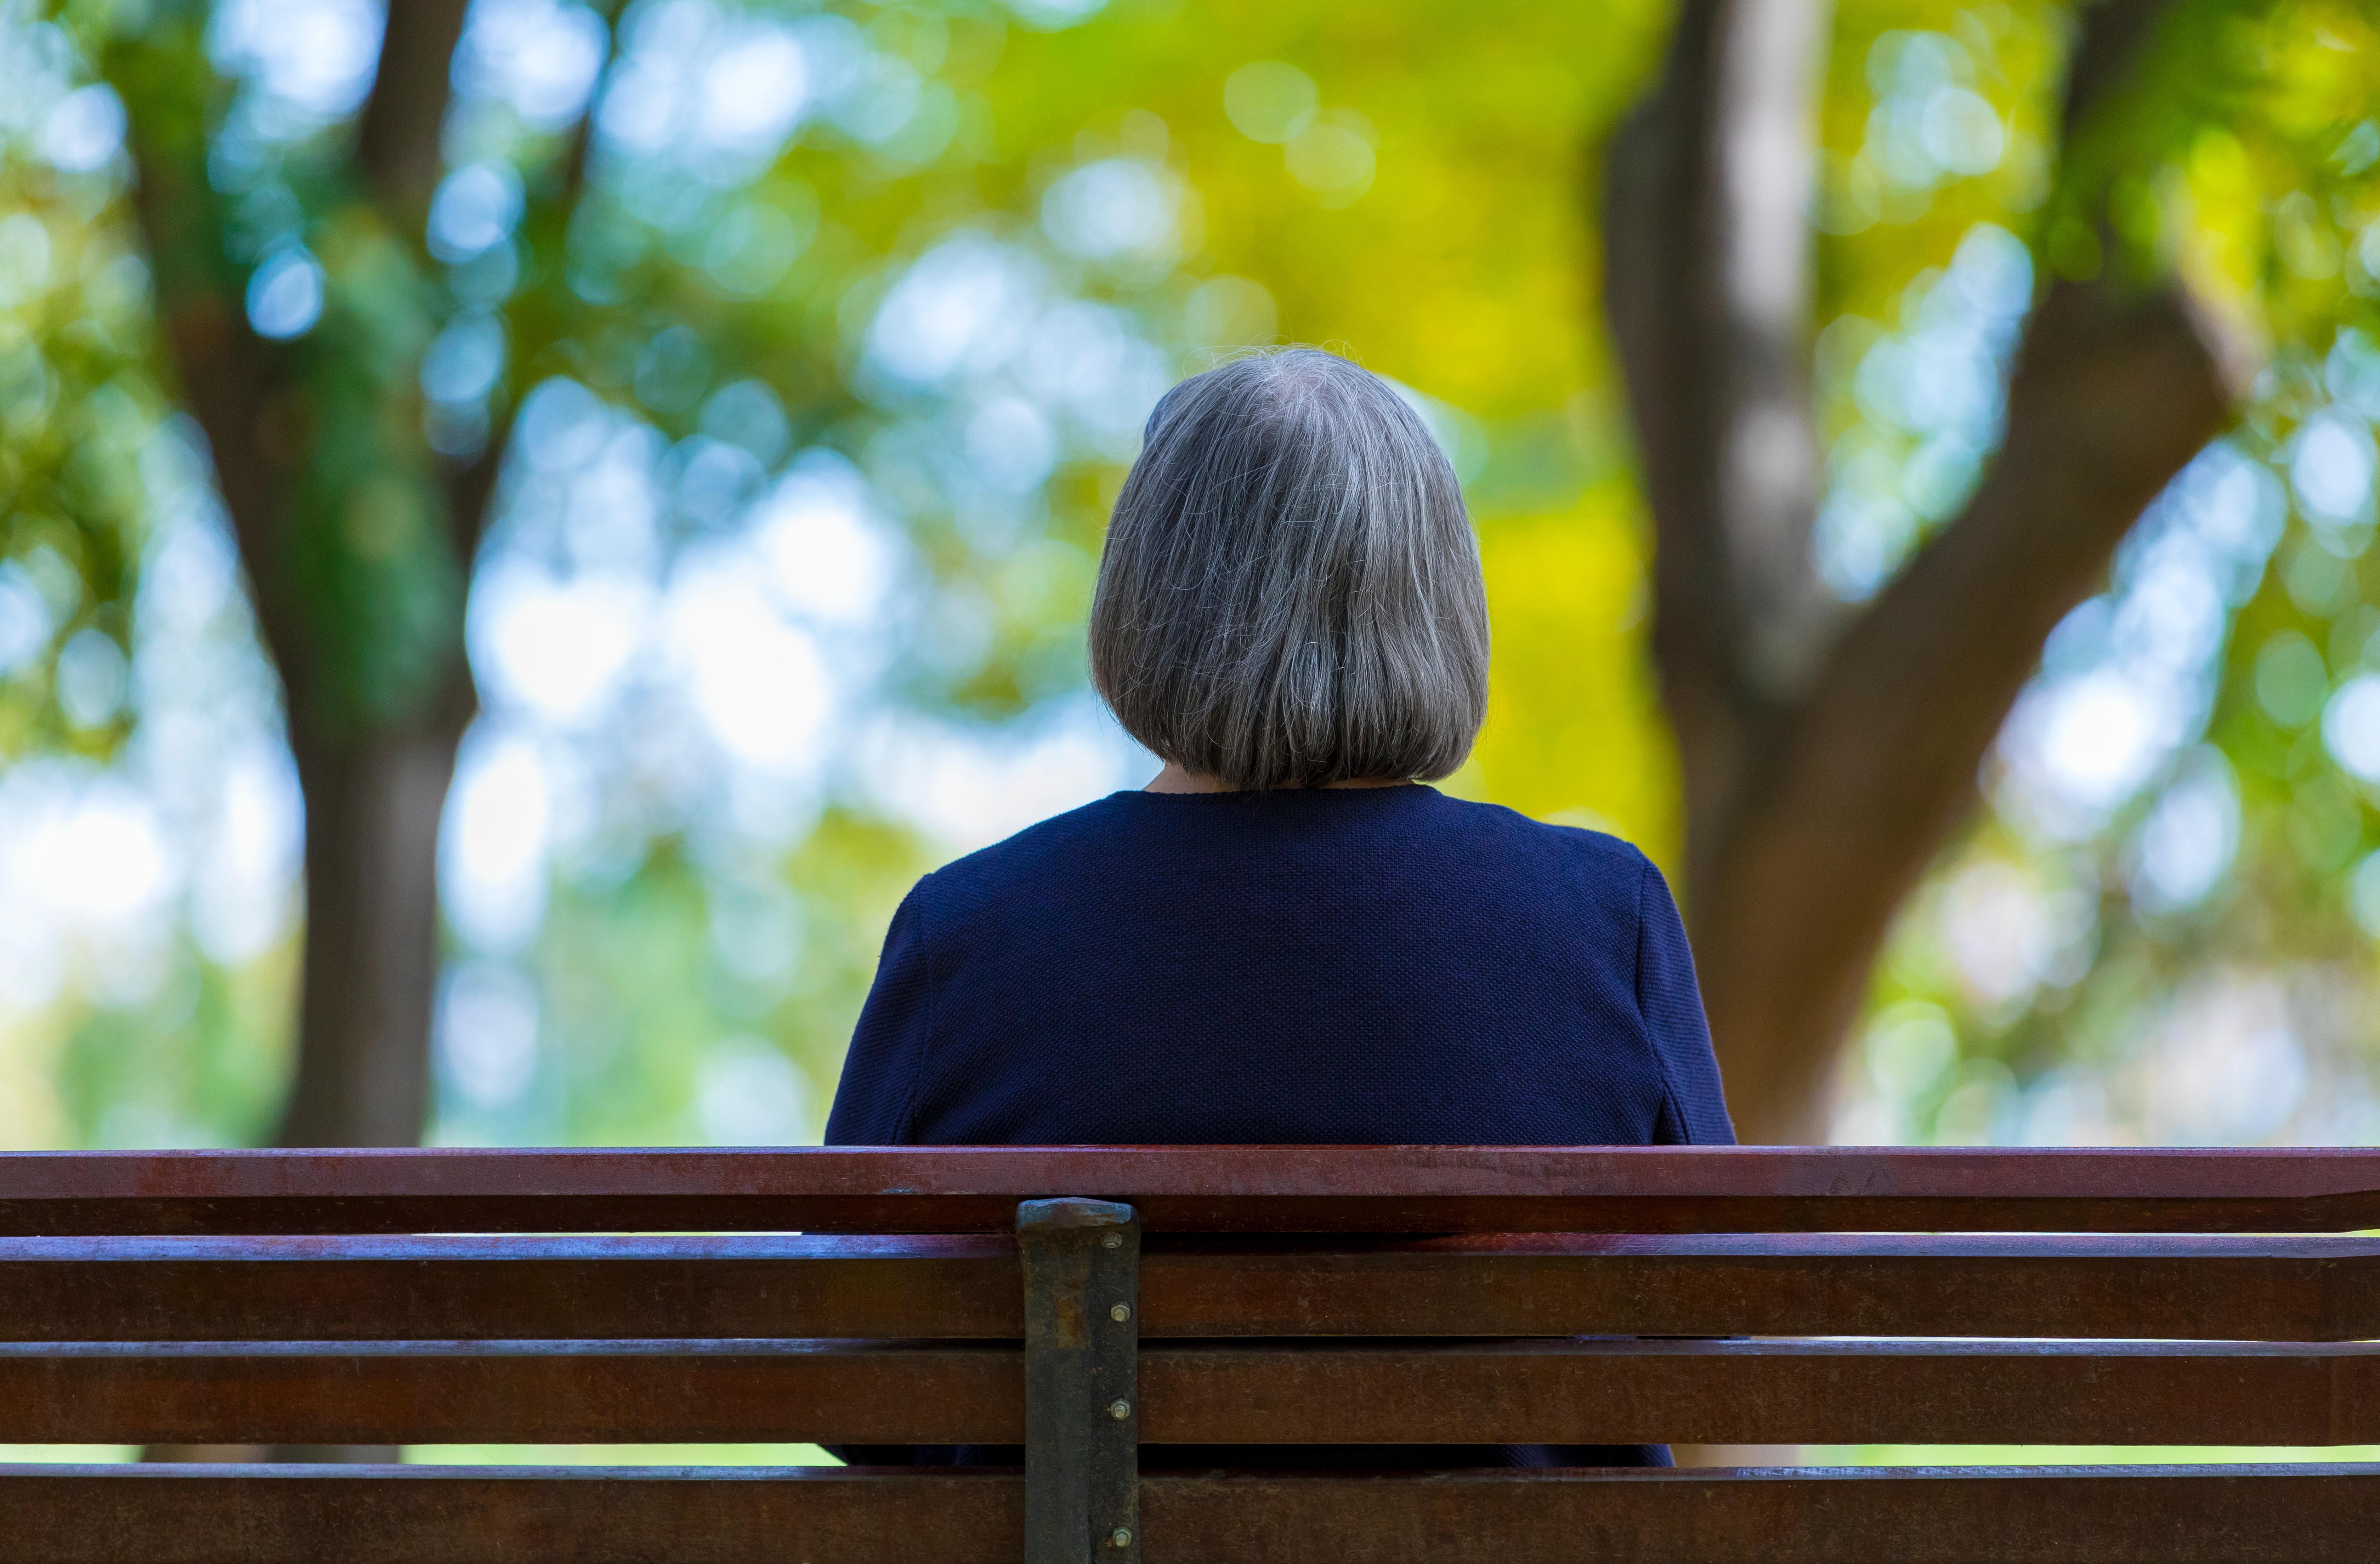 A back view of a senior woman sitting alone on a bench outside | Source: Shutterstock